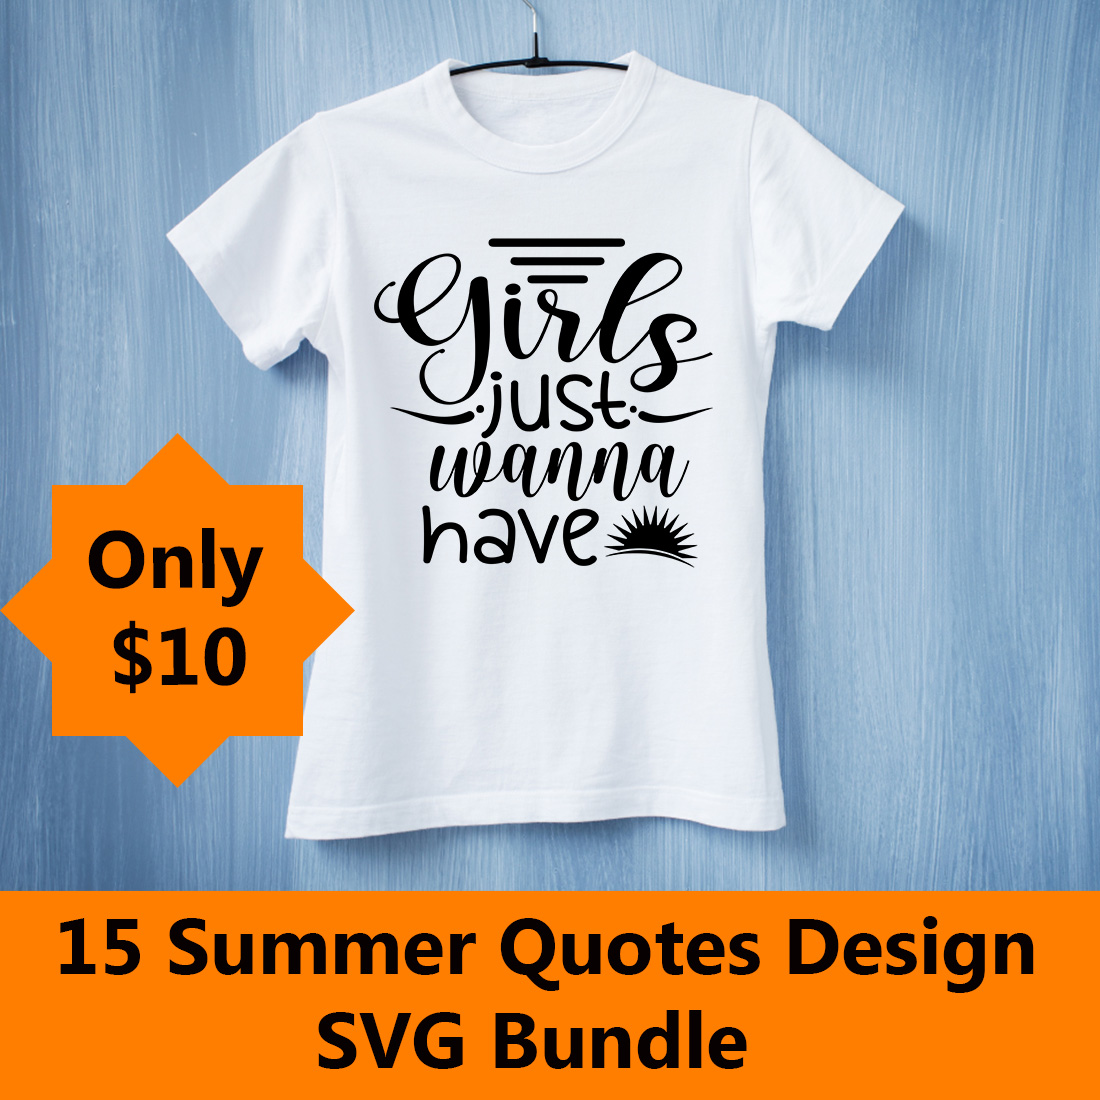 Image of a white t-shirt with gorgeous slogan Girls just wanna have sun